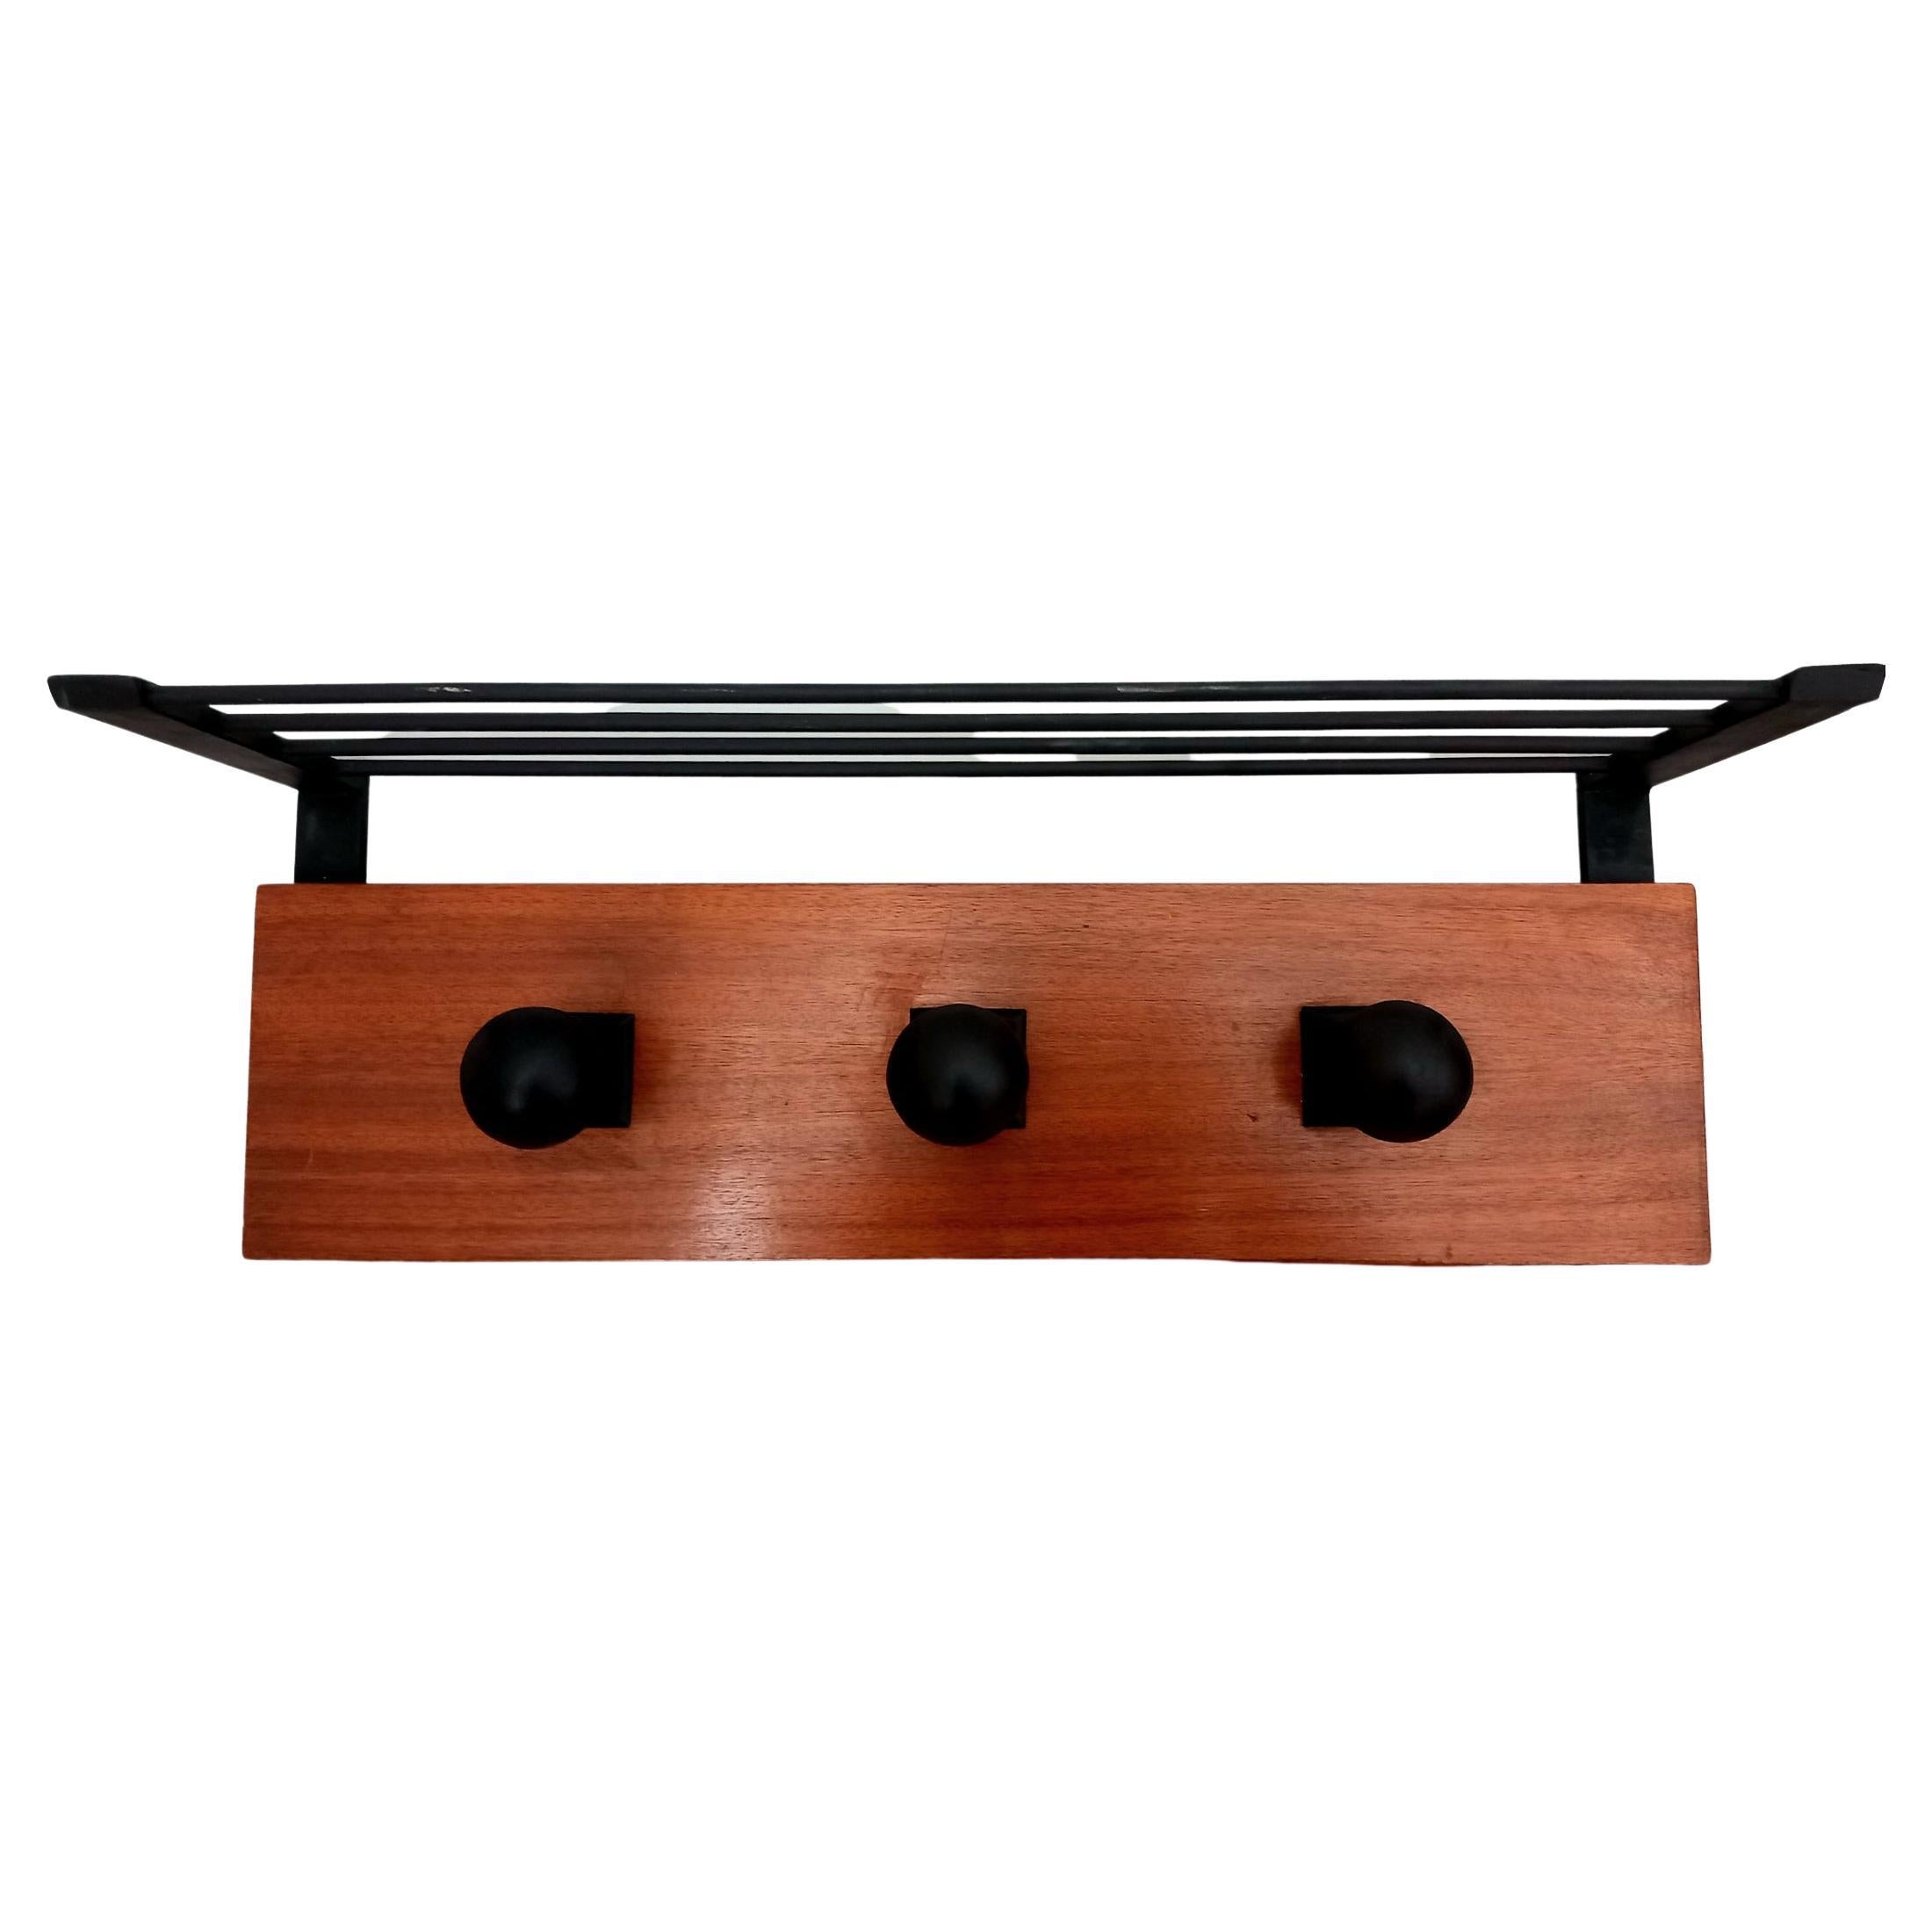 It has the style ,class and sobriety of Mid century 50s Design.Milan Style

Beautiful, sober and minimalist and elegant Mid Century Modern coat rack, It is an  italian  coat rack from the 50s. It has the elegance and sobriety of the nordic design of